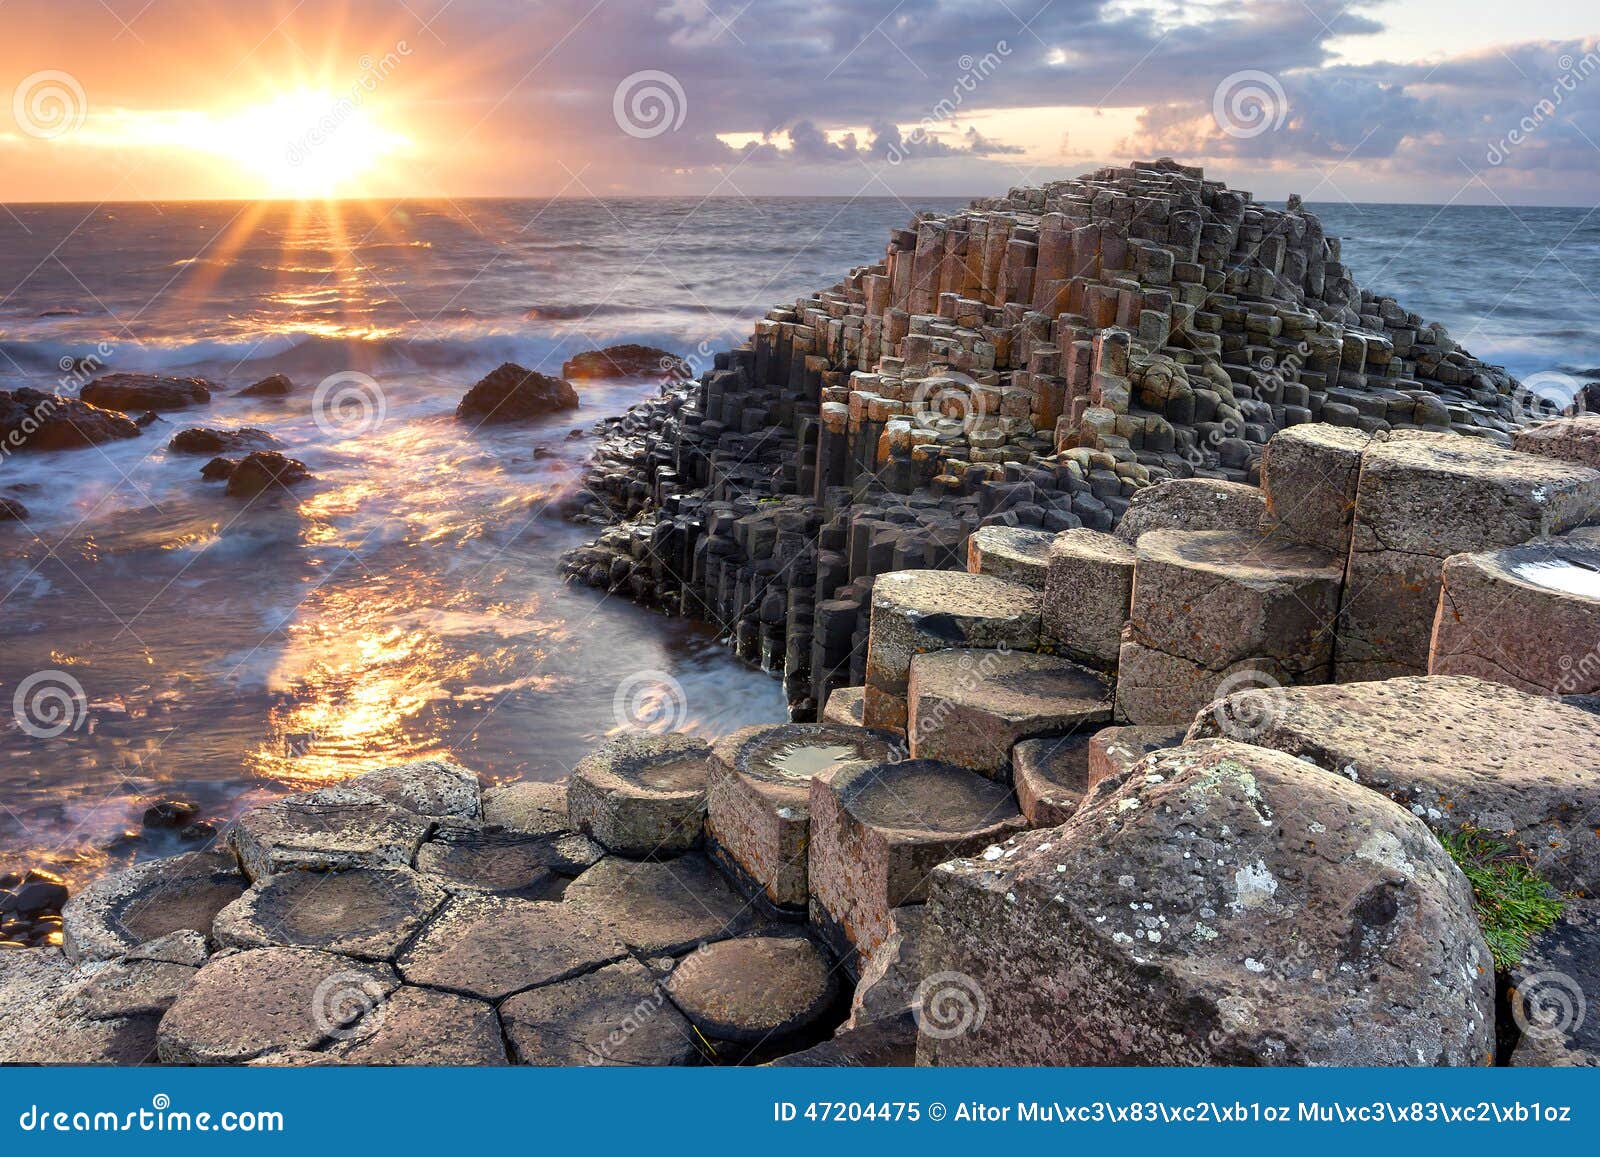 sunset at giant s causeway